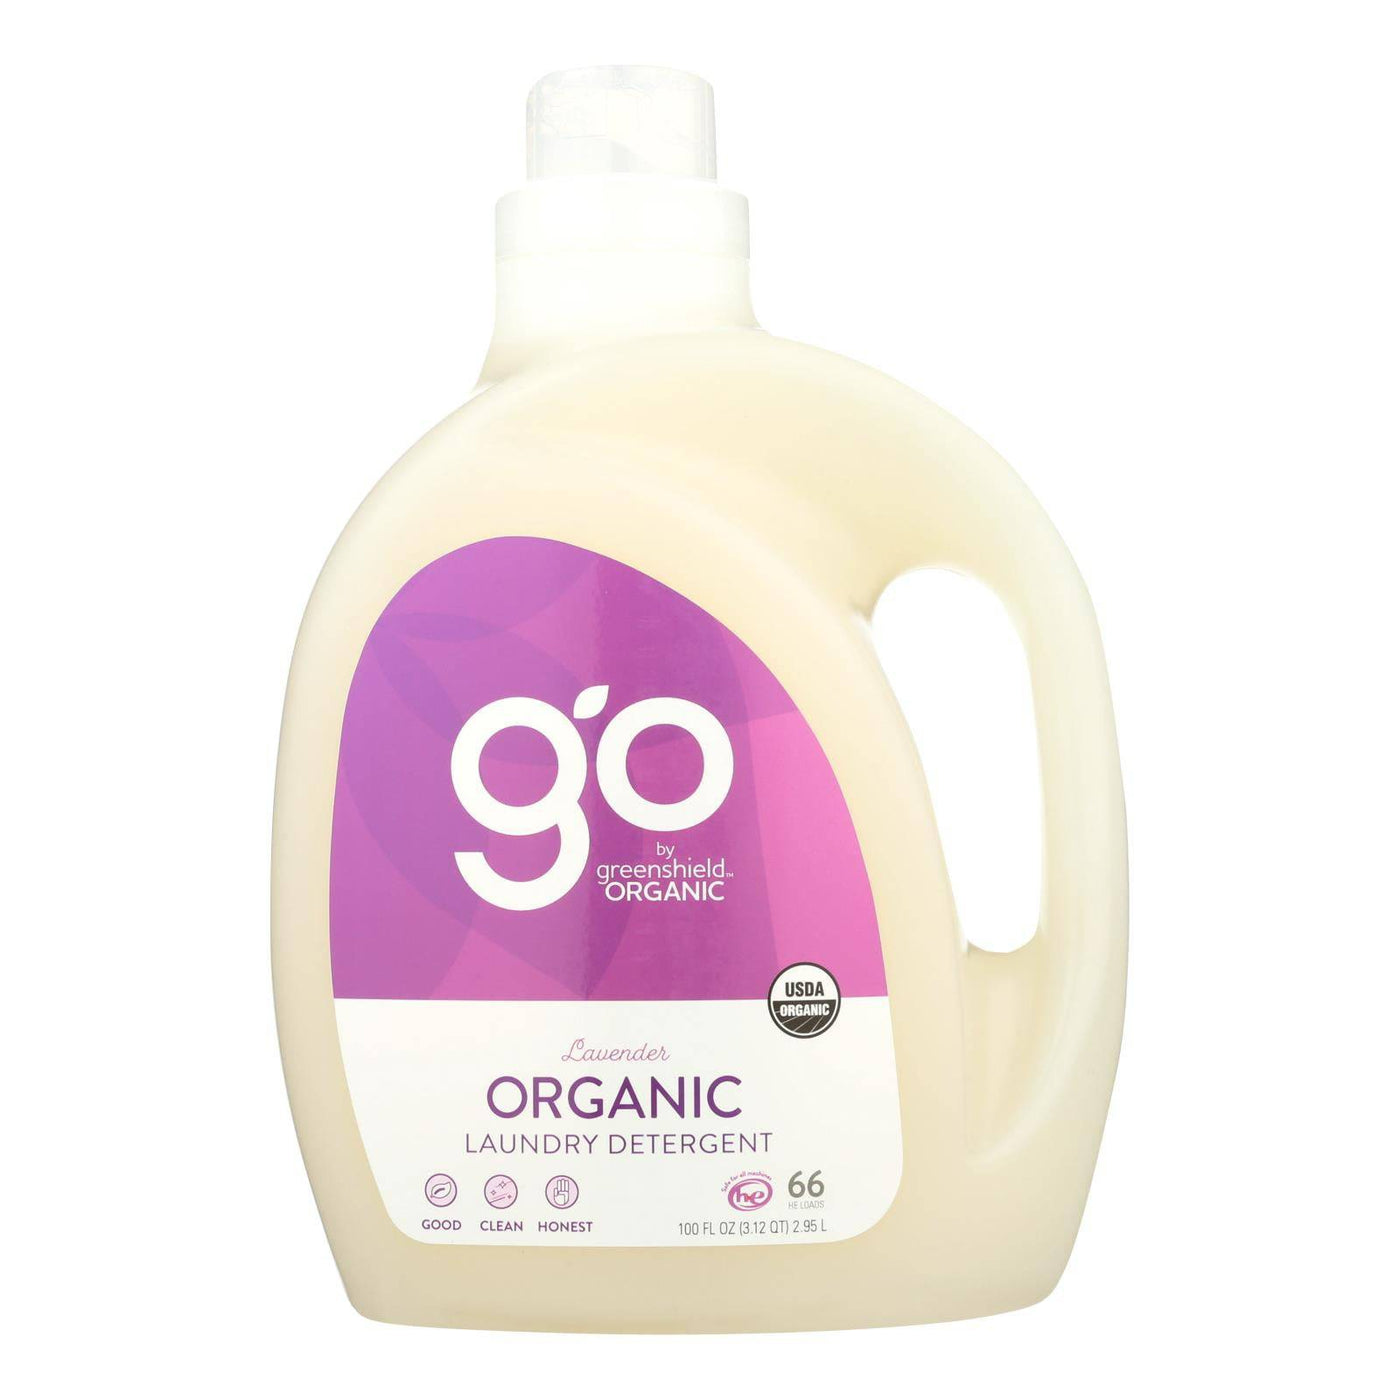 Buy Green Shield Organic Laundry Detergent - Lavender - Case Of 2 - 100 Fl Oz.  at OnlyNaturals.us